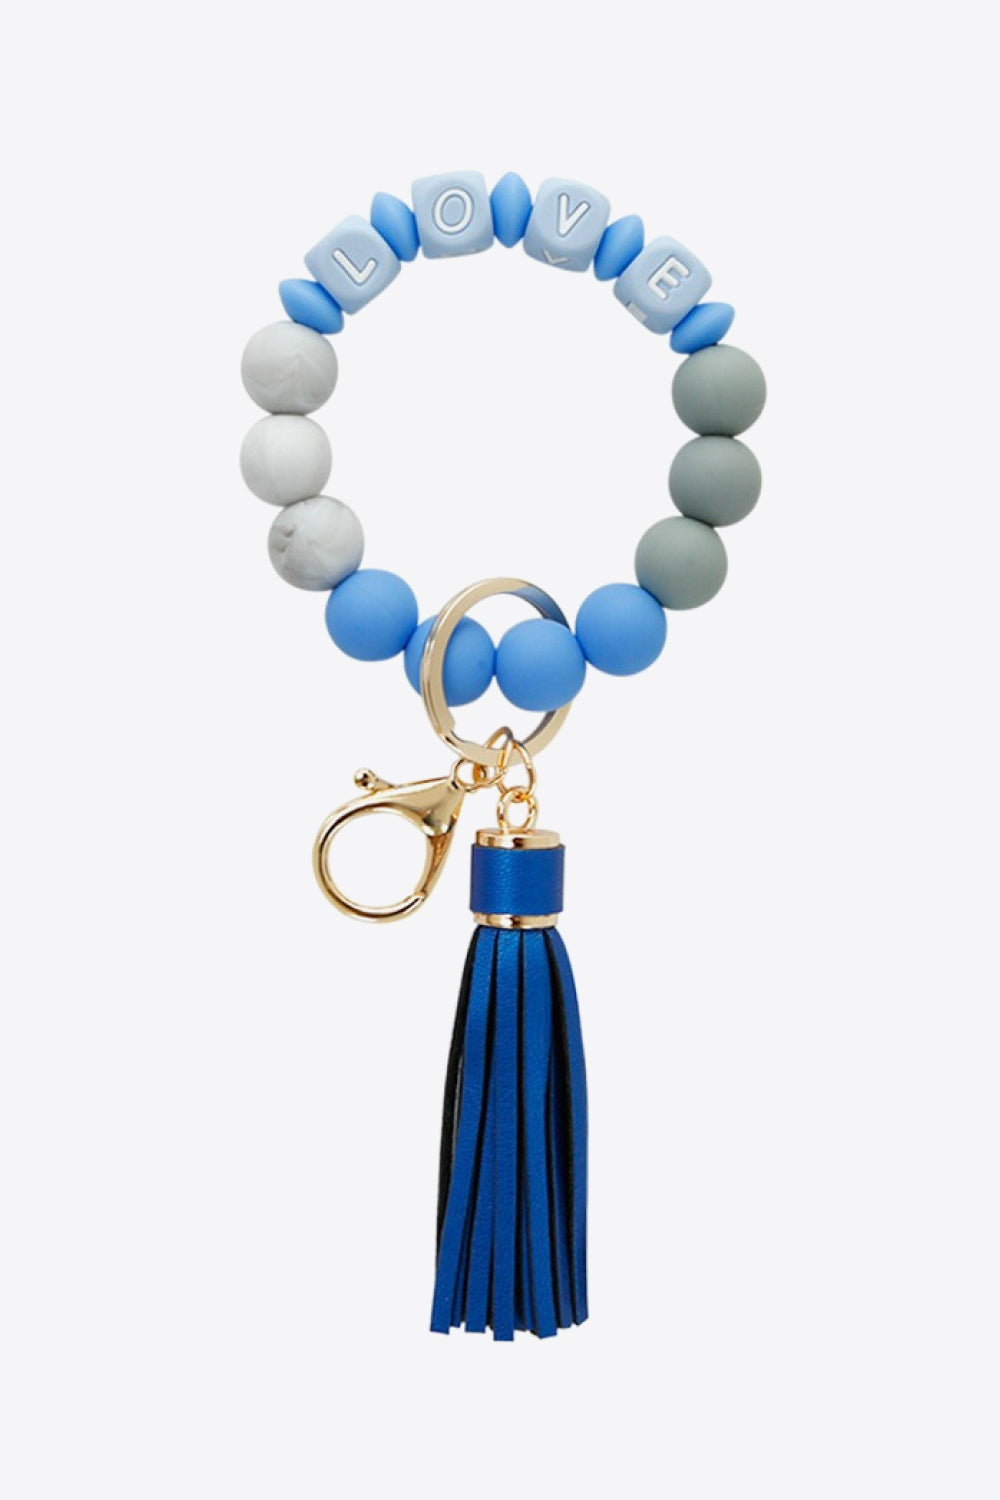 Trendsi Cupid Beauty Supplies Misty Blue / One Size Keychains LOVE Beaded Keychain with Tassel